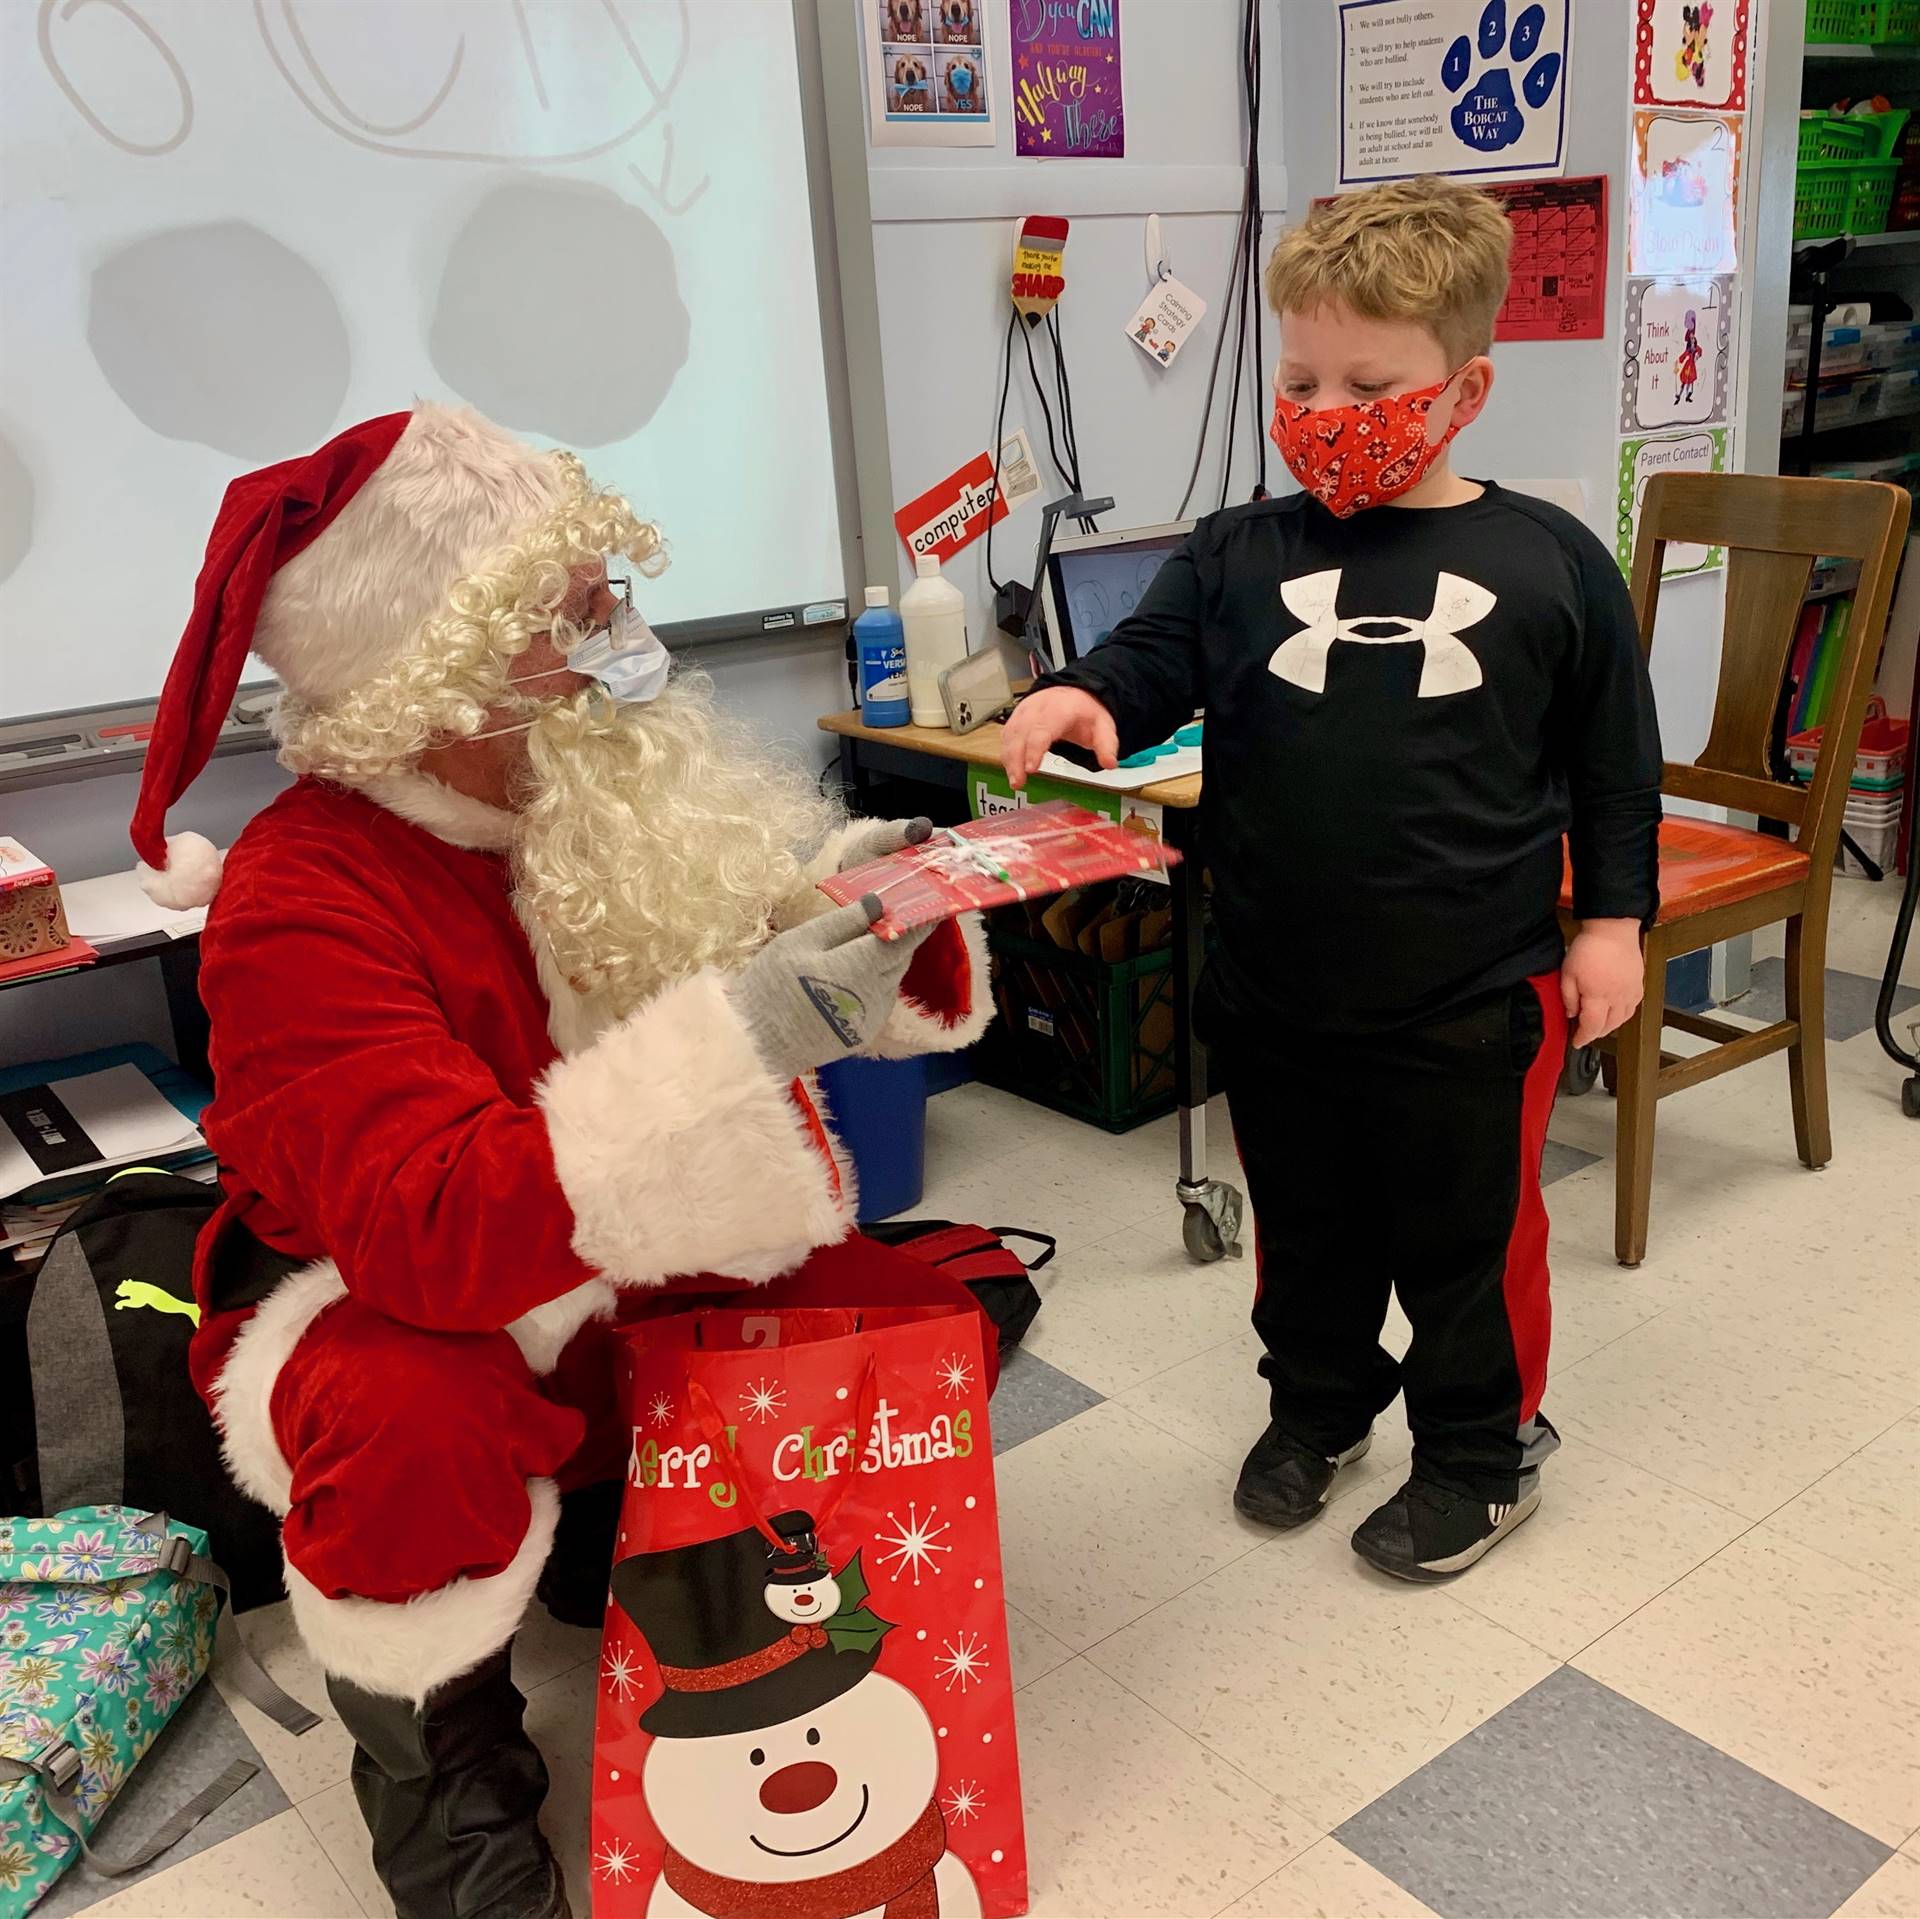 A student takes a gift from Santa.